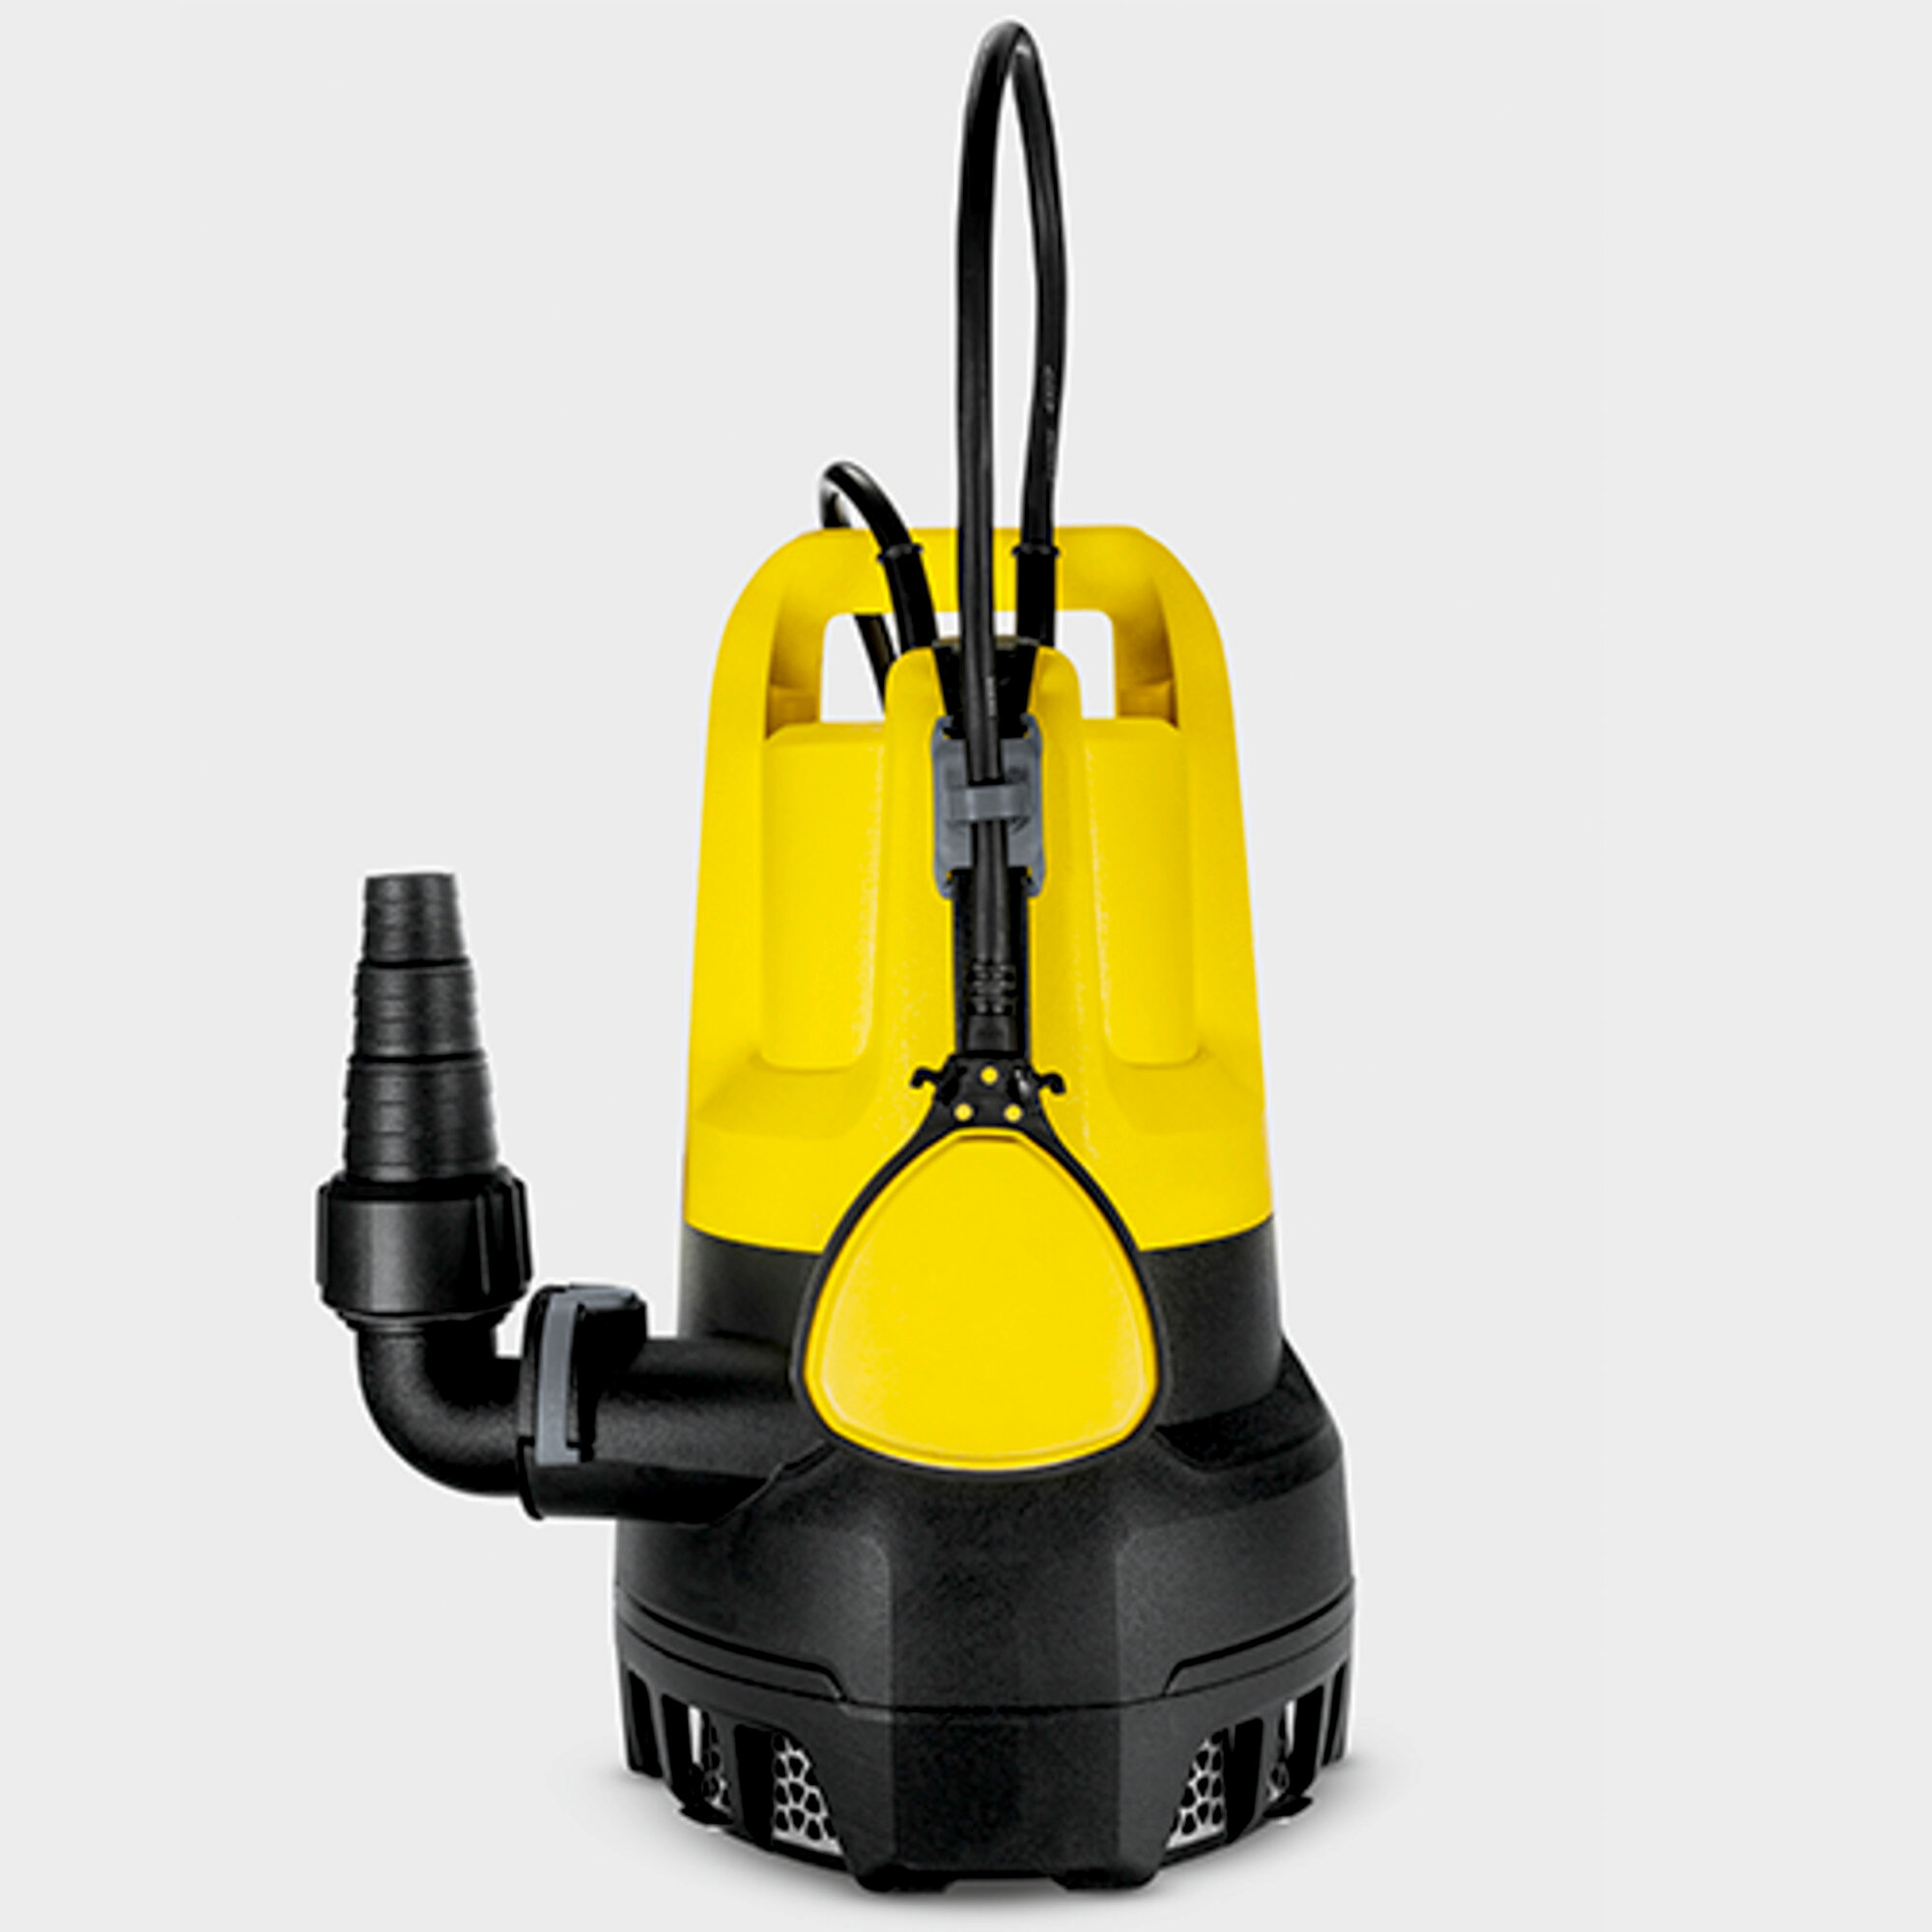 Submersible dirty water pump SP 7 Dirt: Height-adjustable float switch